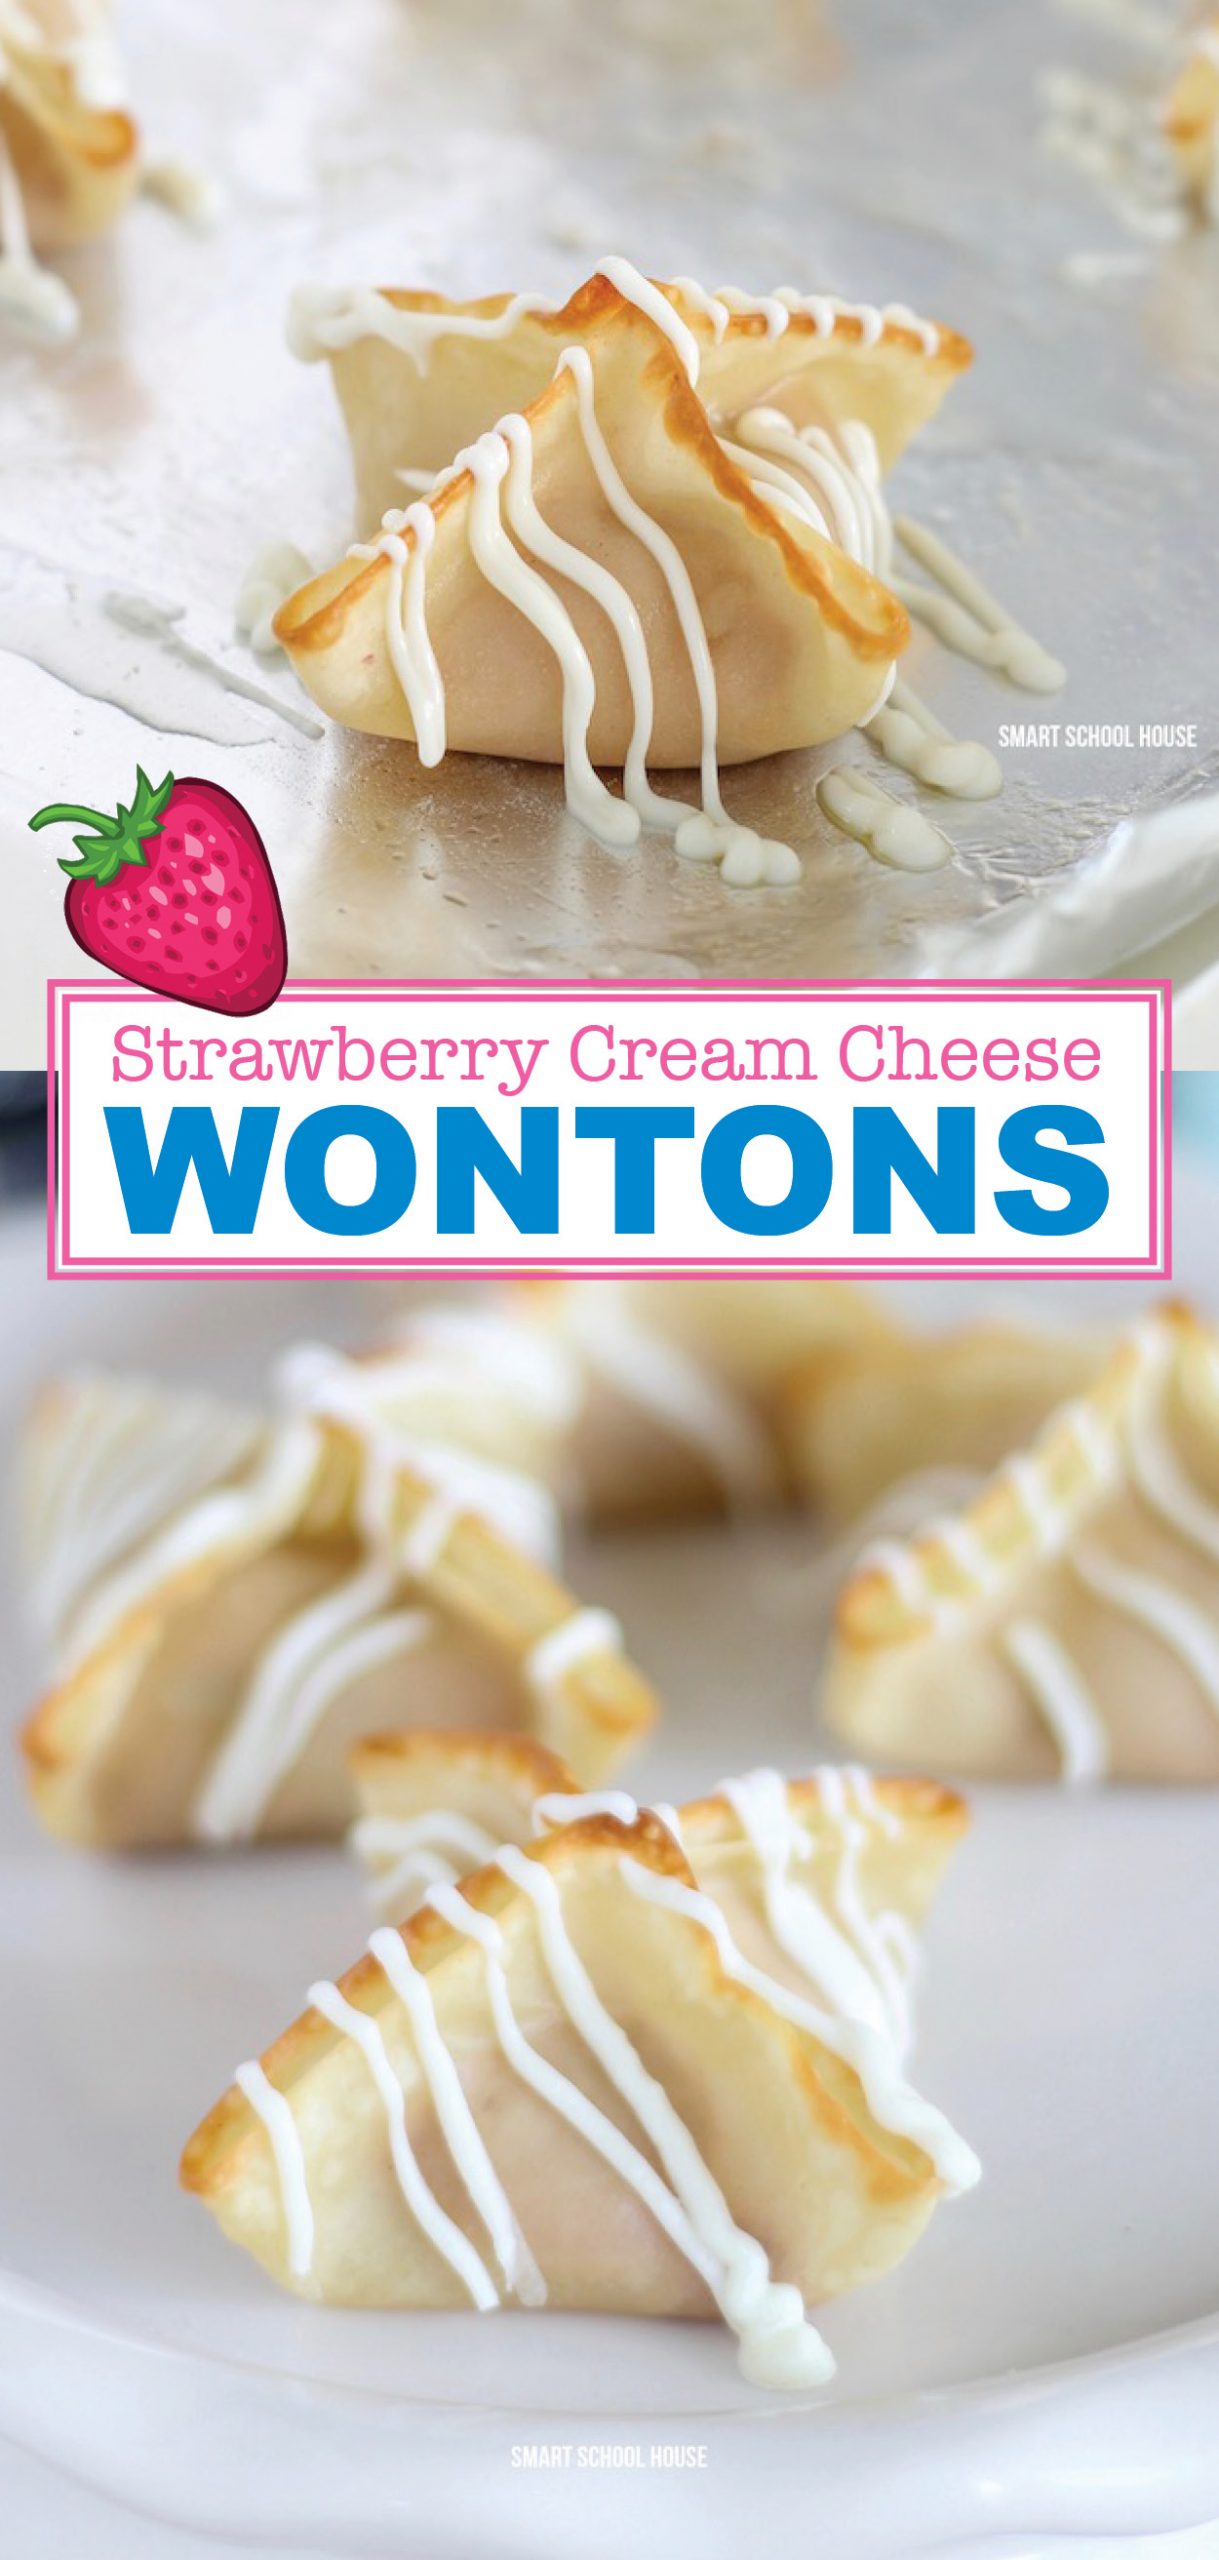 Strawberry Cream Cheese Wontons - 4 ingredient sweet and fluffy strawberry cream cheese mixed with buttery soft baked wonton flavor then drizzled in white chocolate.